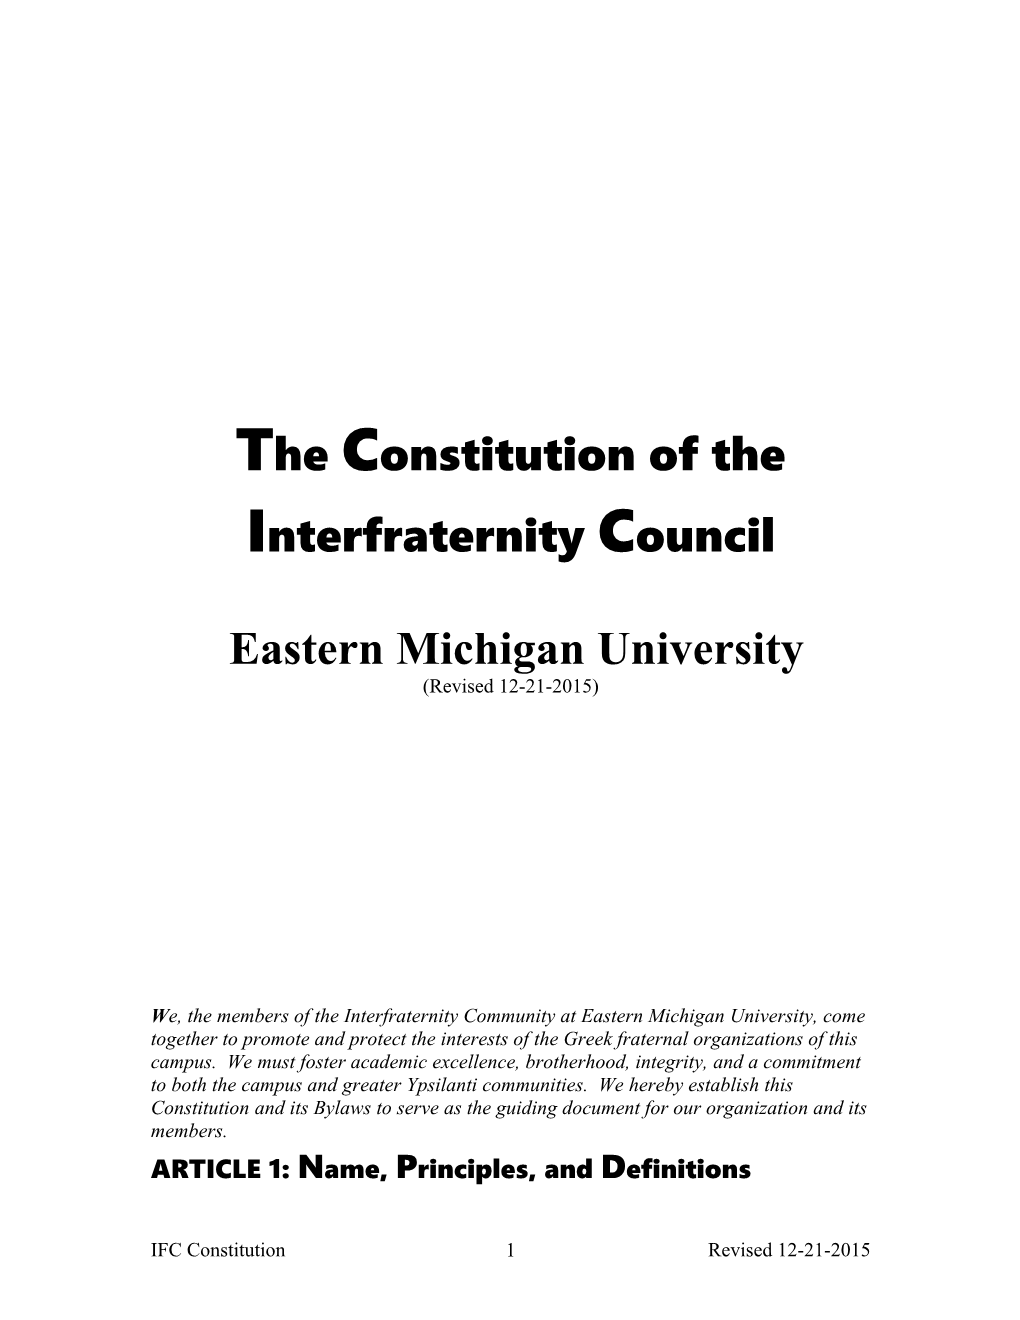 The Constitution of the Interfraternity Council